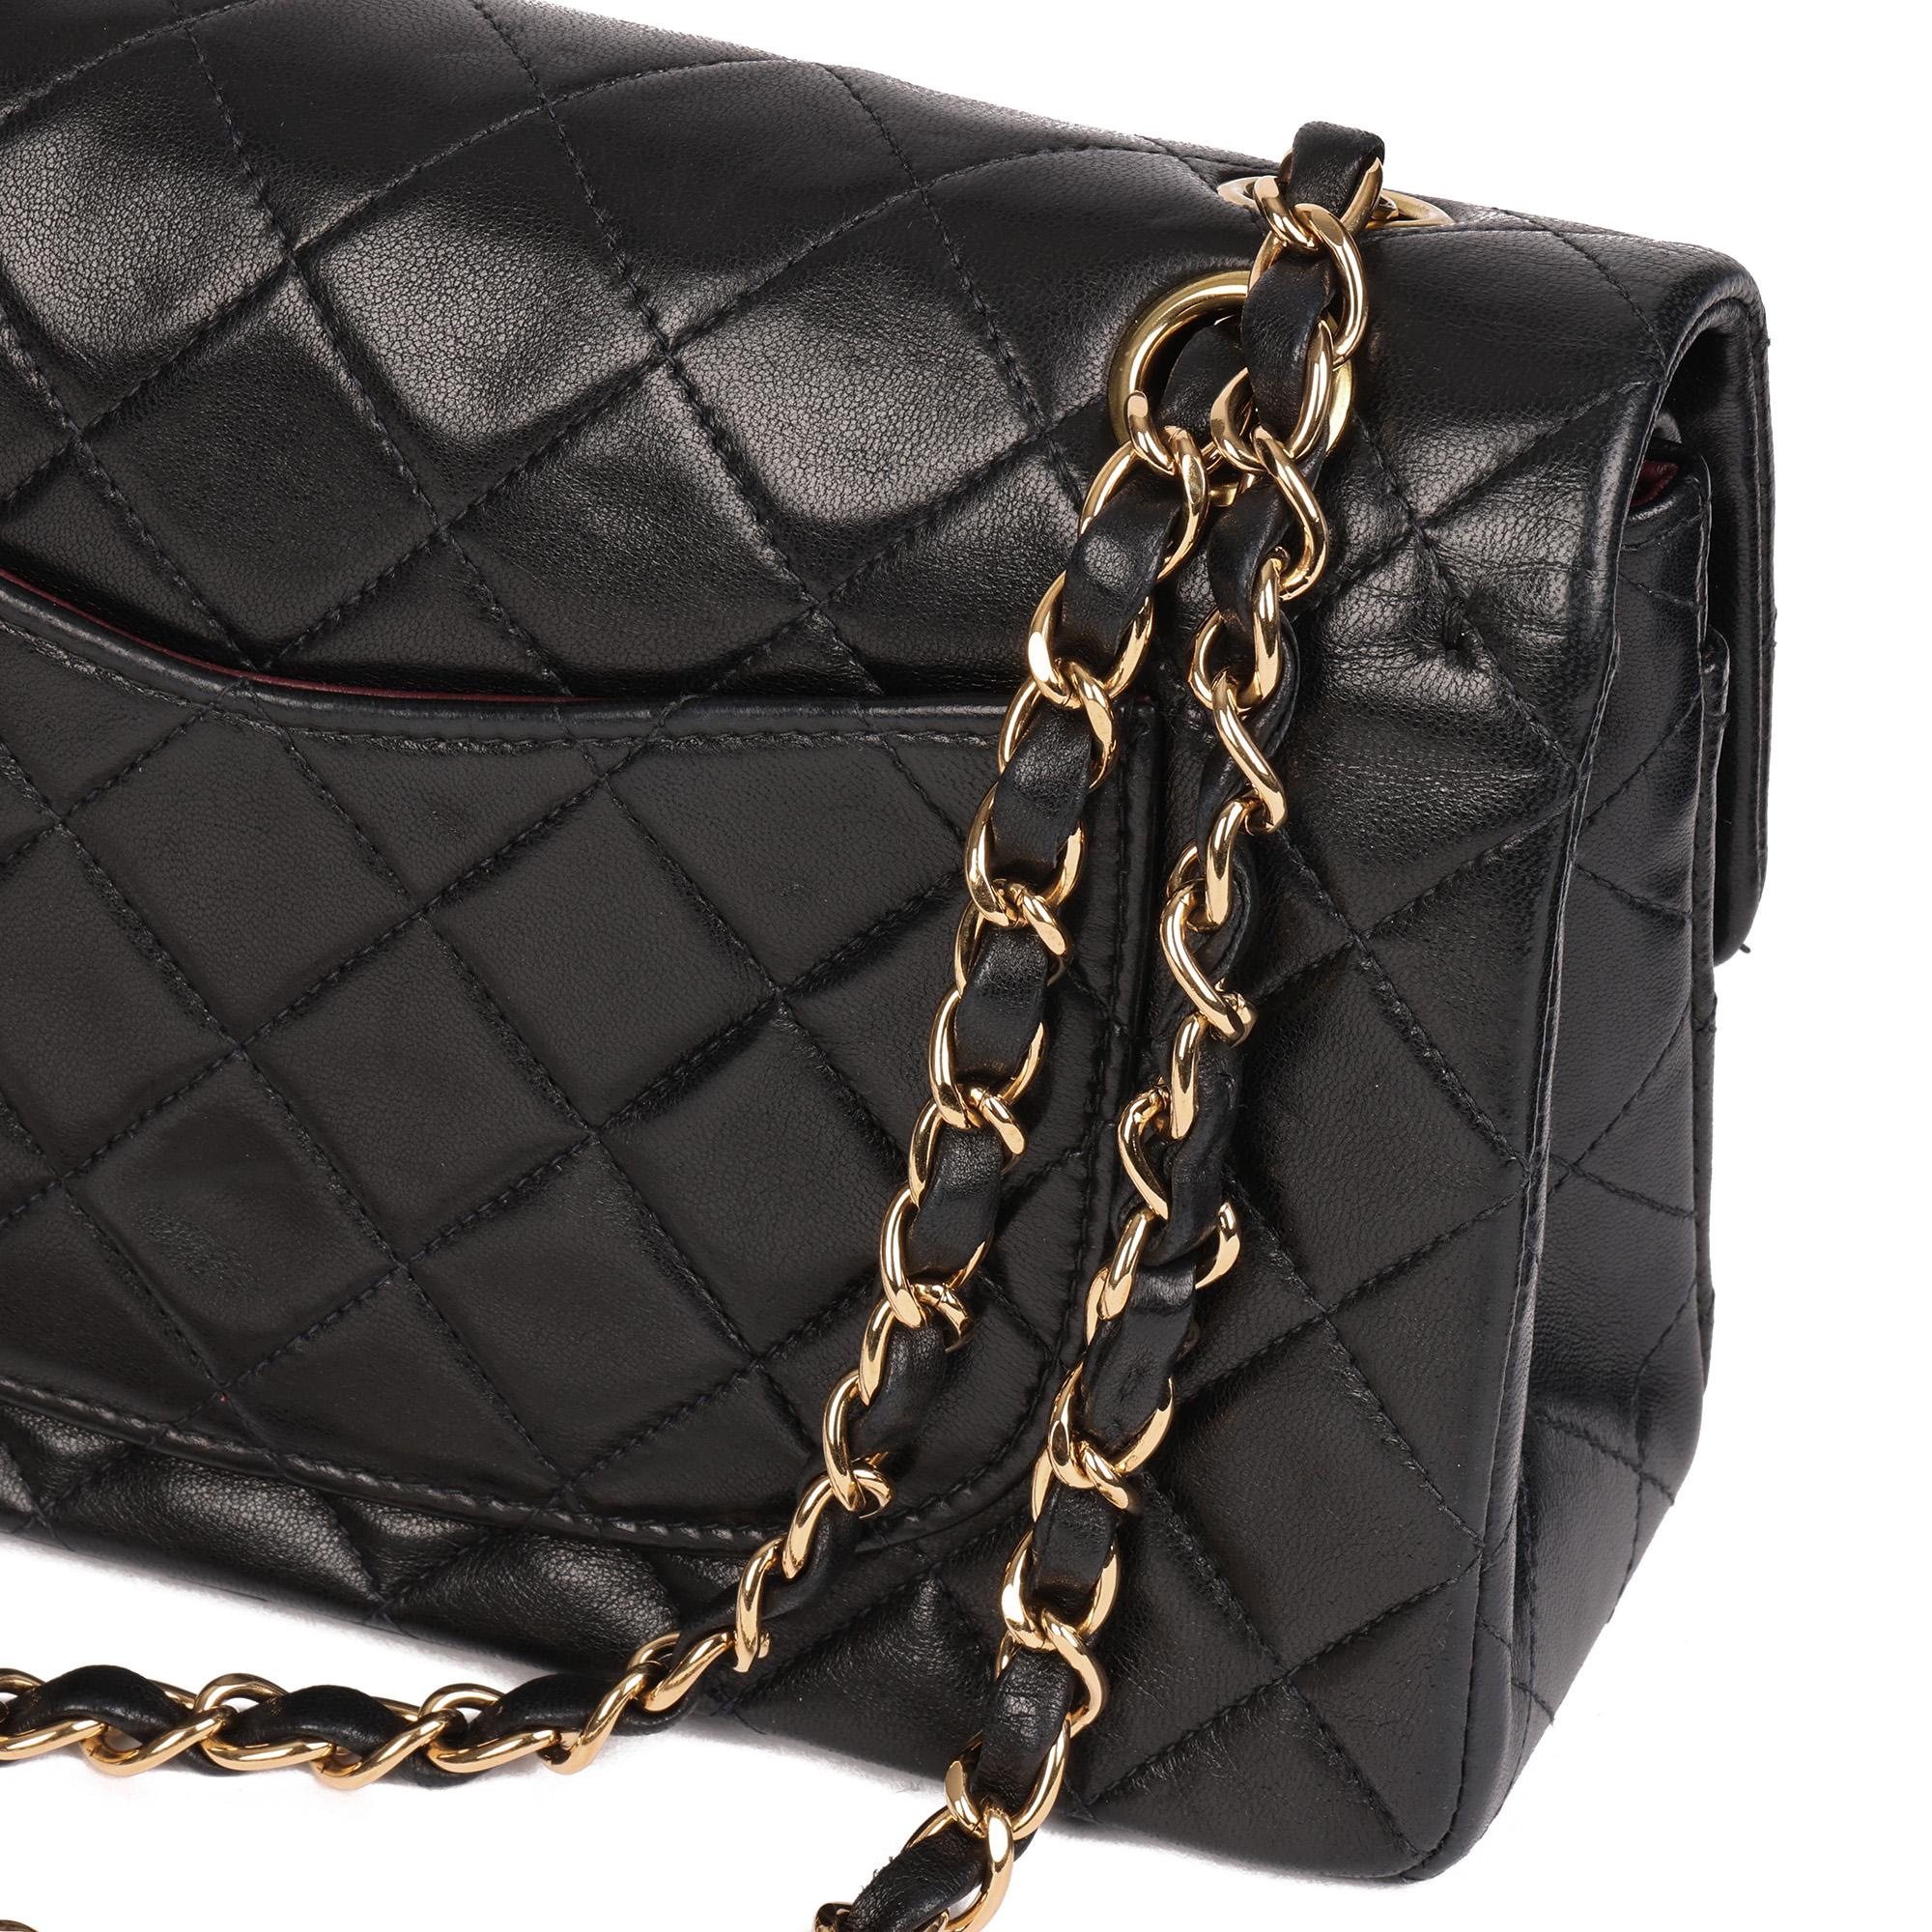 Chanel BLACK QUILTED LAMBSKIN VINTAGE SMALL CLASSIC DOUBLE FLAP BAG 3